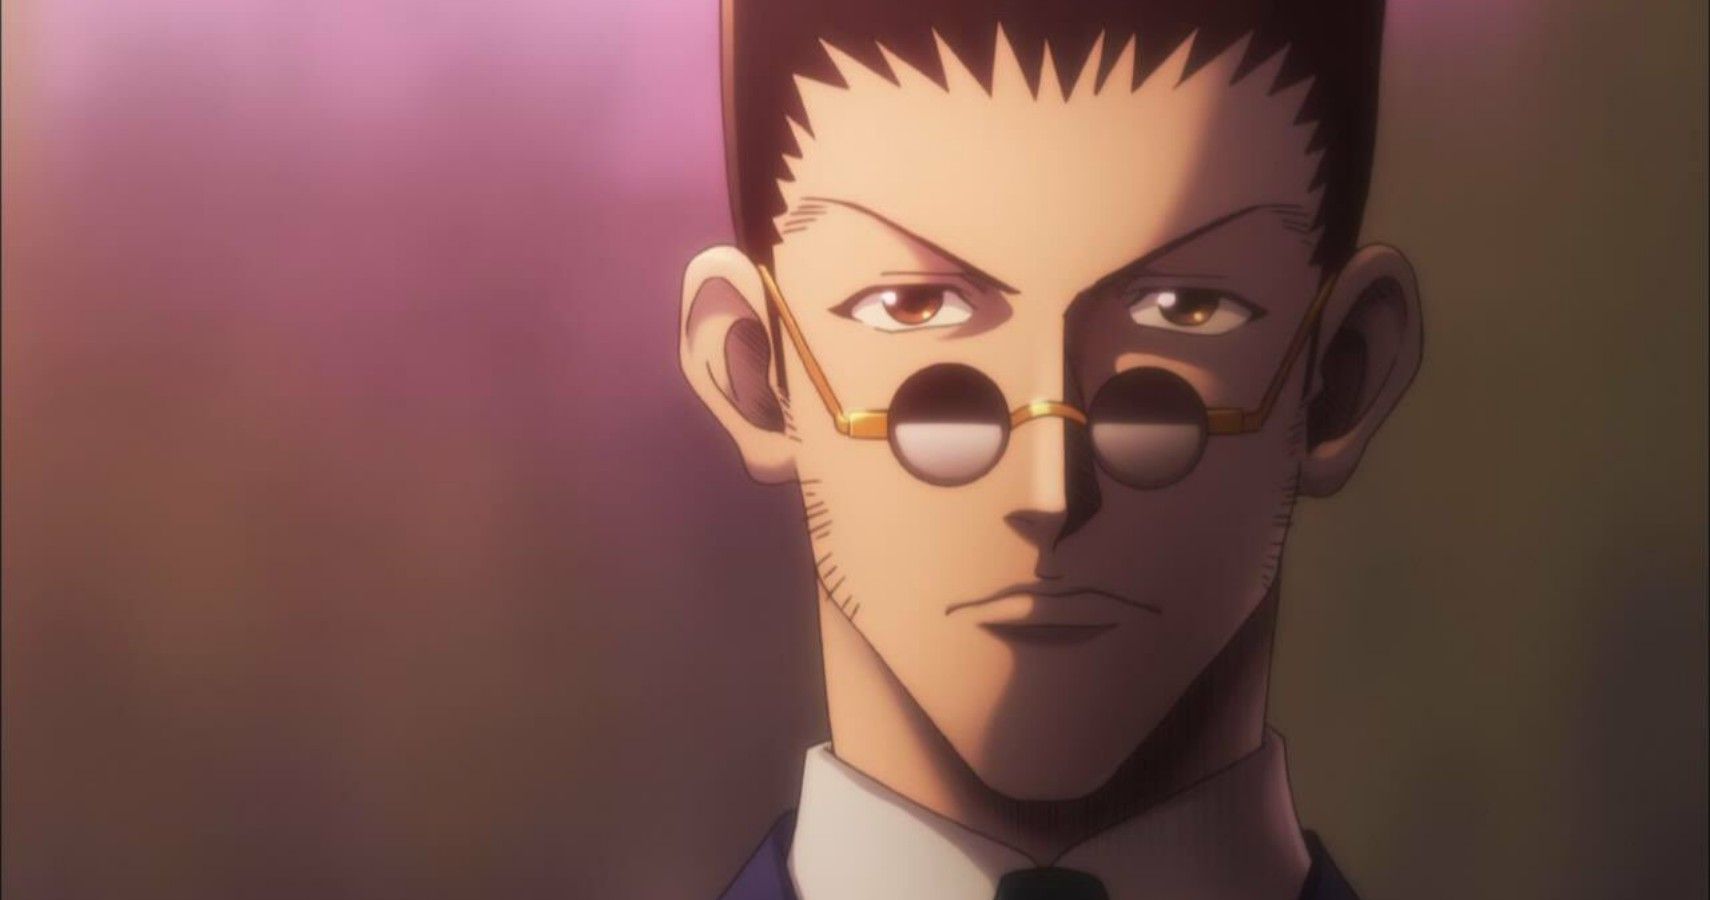 Why was leorio a candidate for chairman when he can't fight at all? - Quora